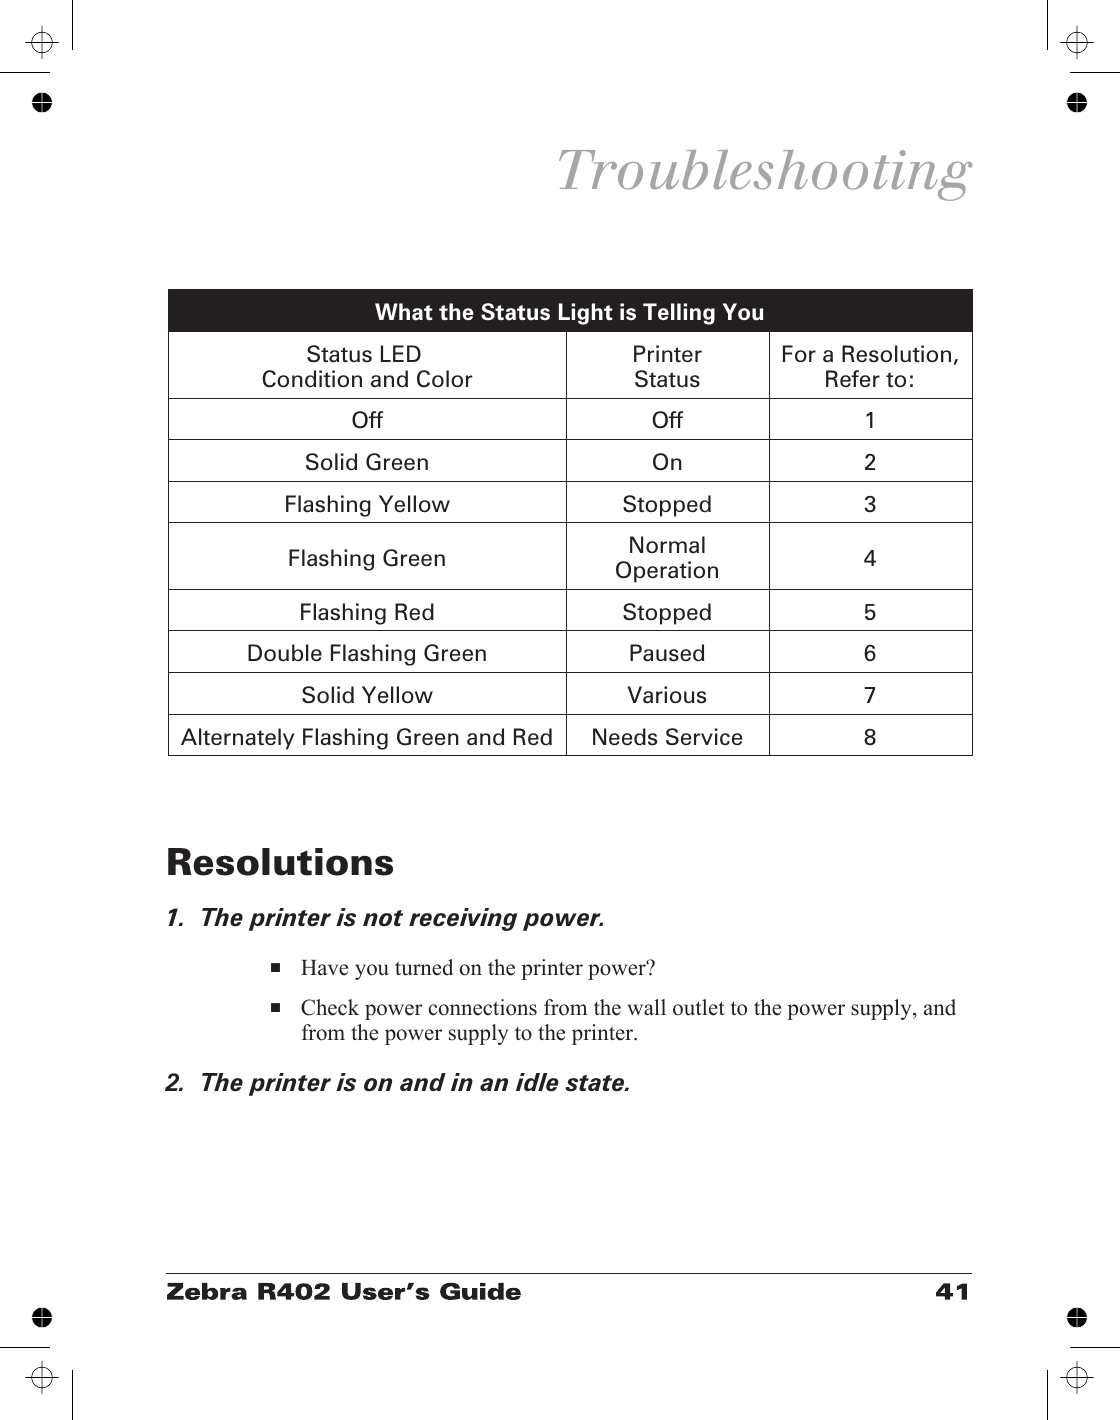 TroubleshootingResolutions1.  The printer is not receiving power.■Have you turned on the printer power?■Check power connections from the wall outlet to the power supply, andfrom the power supply to the printer.2.  The printer is on and in an idle state.What the Status Light is Telling YouStatus LEDCondition and Color PrinterStatus For a Resolution,Refer to:Off Off 1Solid Green On 2Flashing Yellow Stopped 3Flashing Green NormalOperation 4Flashing Red Stopped 5Double Flashing Green Paused 6Solid Yellow Various 7Alternately Flashing Green and Red Needs Service 8